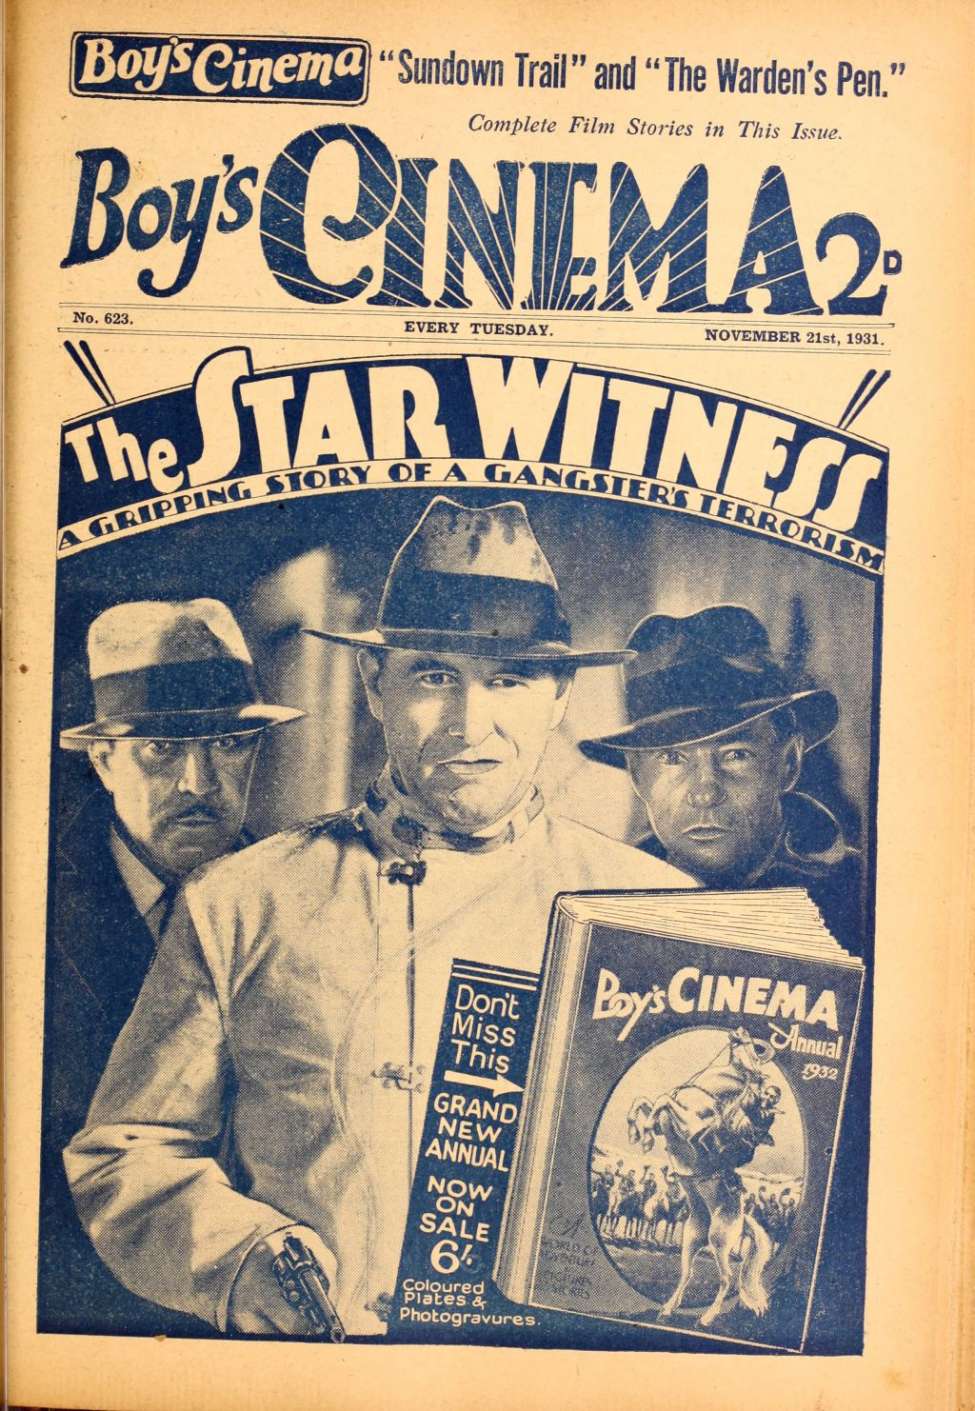 Book Cover For Boy's Cinema 623 - The Star Witness - Charles (Chic) Sale